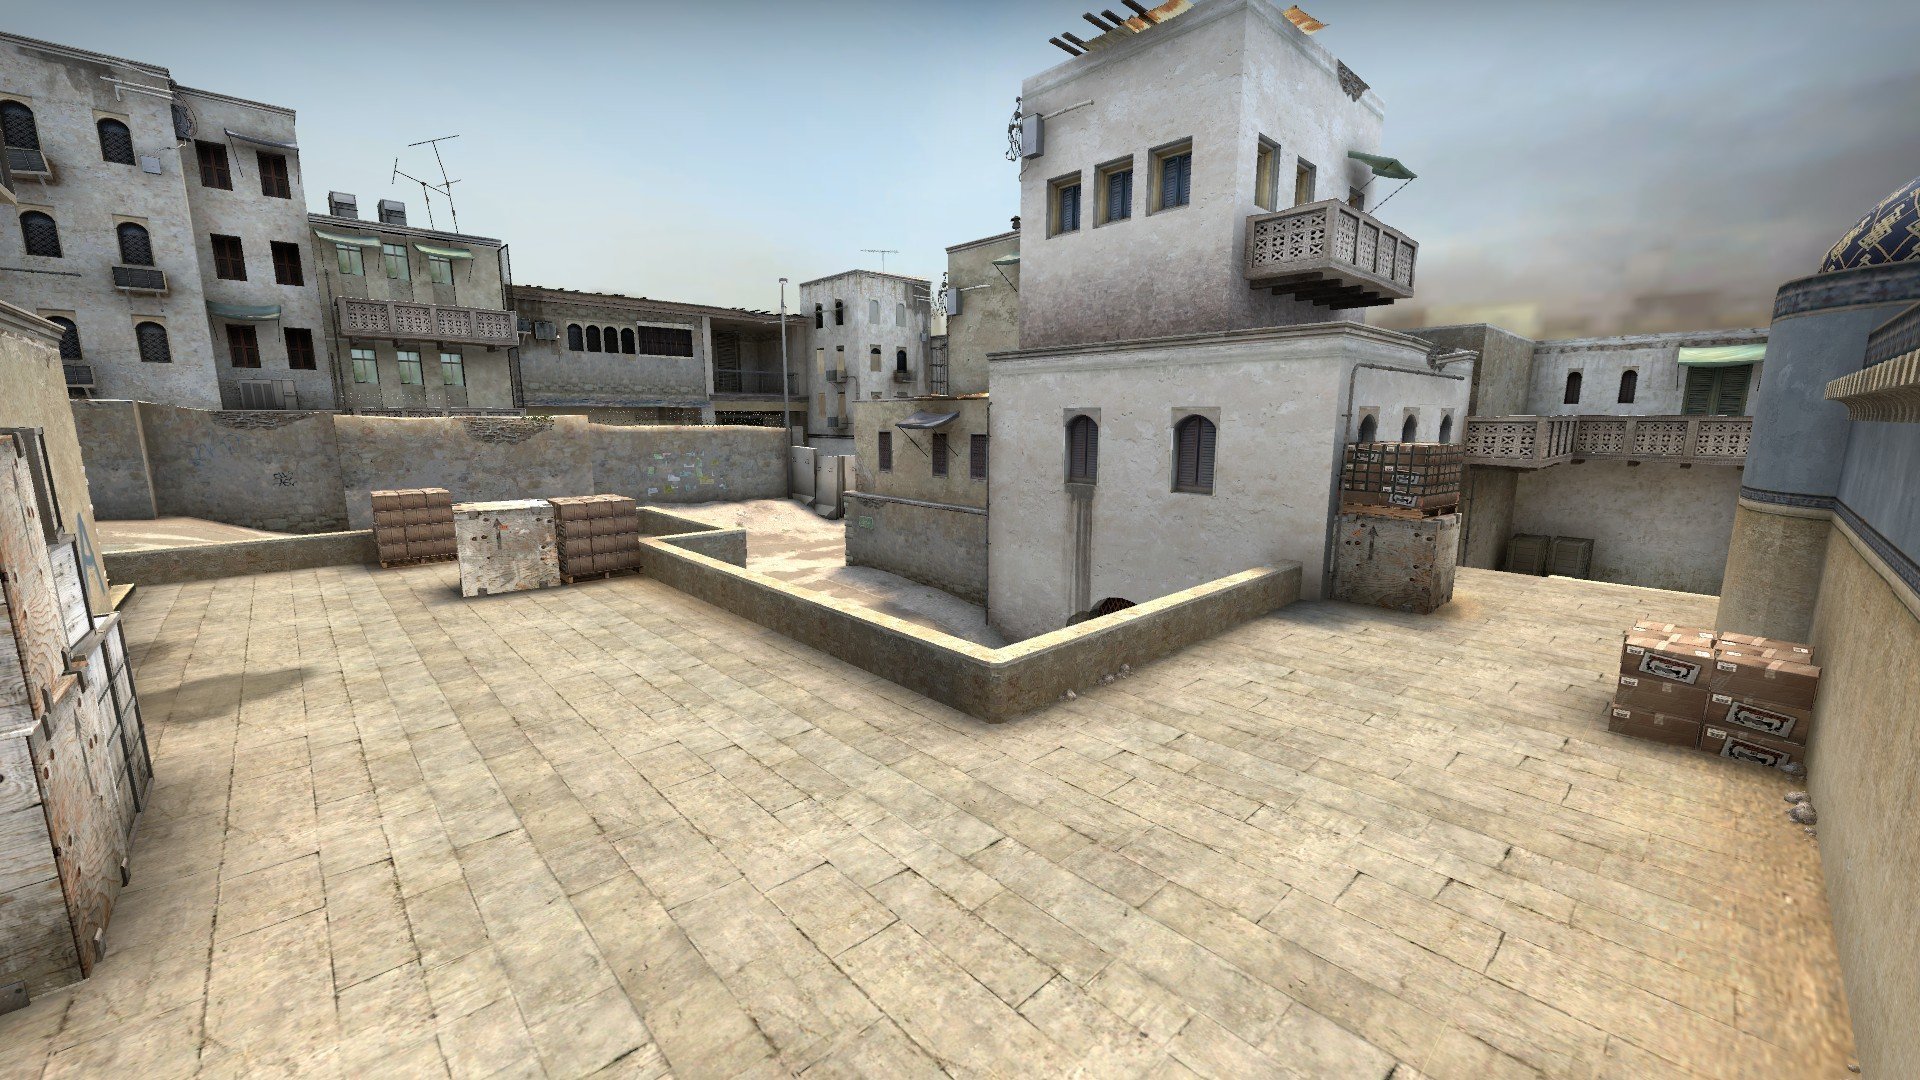 De_Dust 2 карта КС го. Counter-Strike: Global Offensive даст 2. Dust 2 CS go фон. КС го дуст 2.